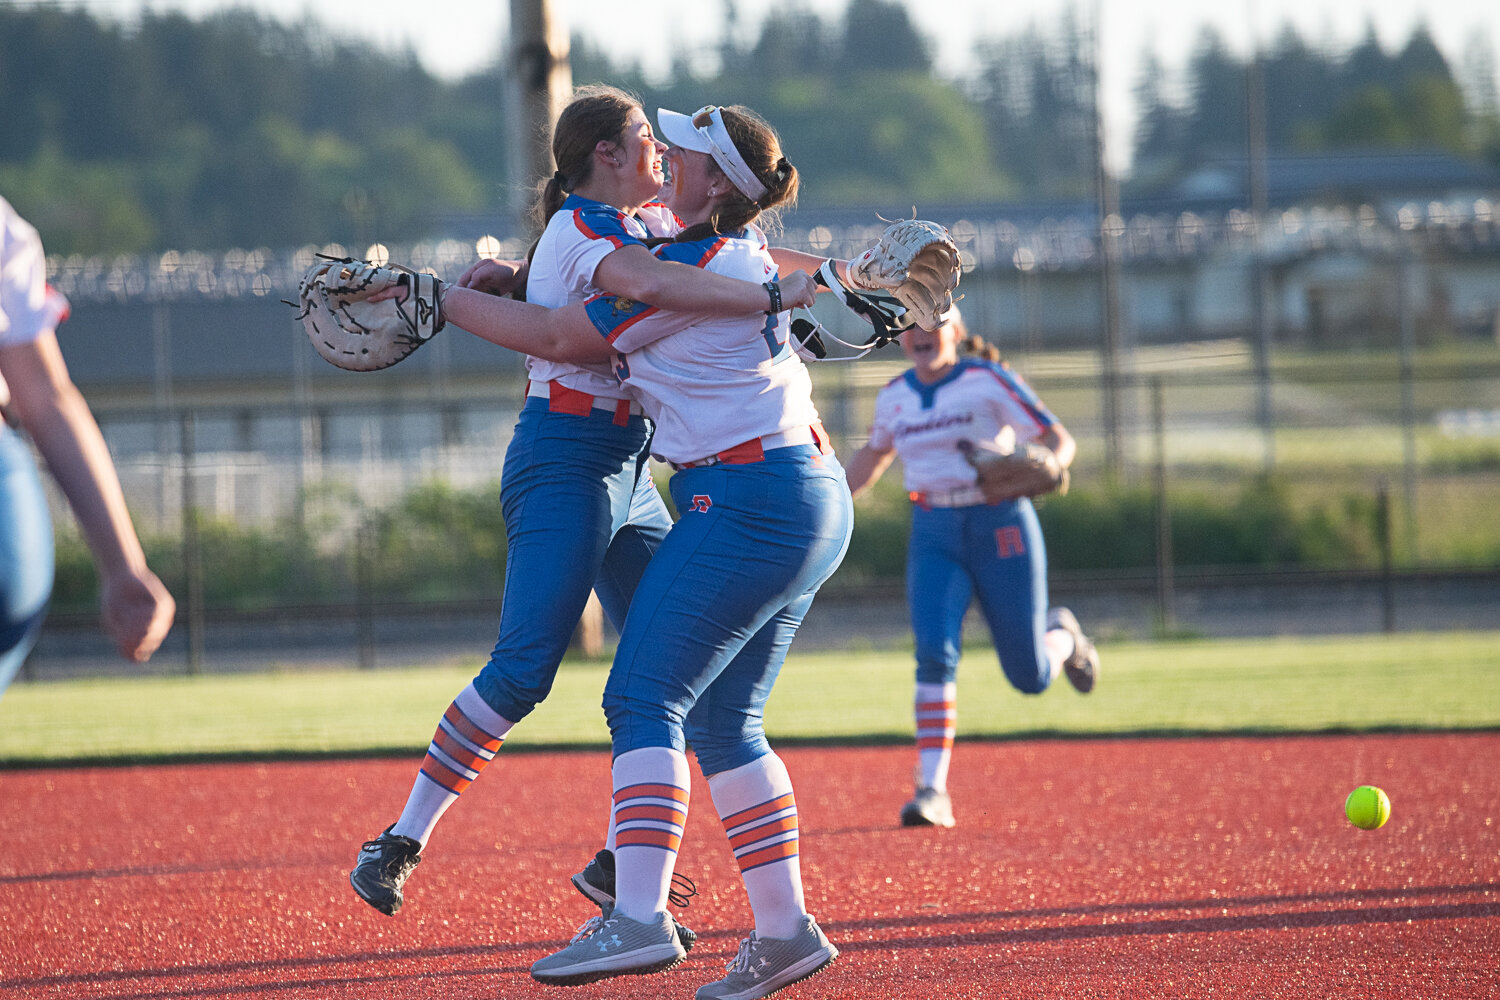 Elizabeth Peery hugs Maizy Whitlow after the final out of Ridgefield's 4-3 win over Tumwater in the semifinals of the 2A District 4 tournament on May 18 at Rec Park in Chehalis.